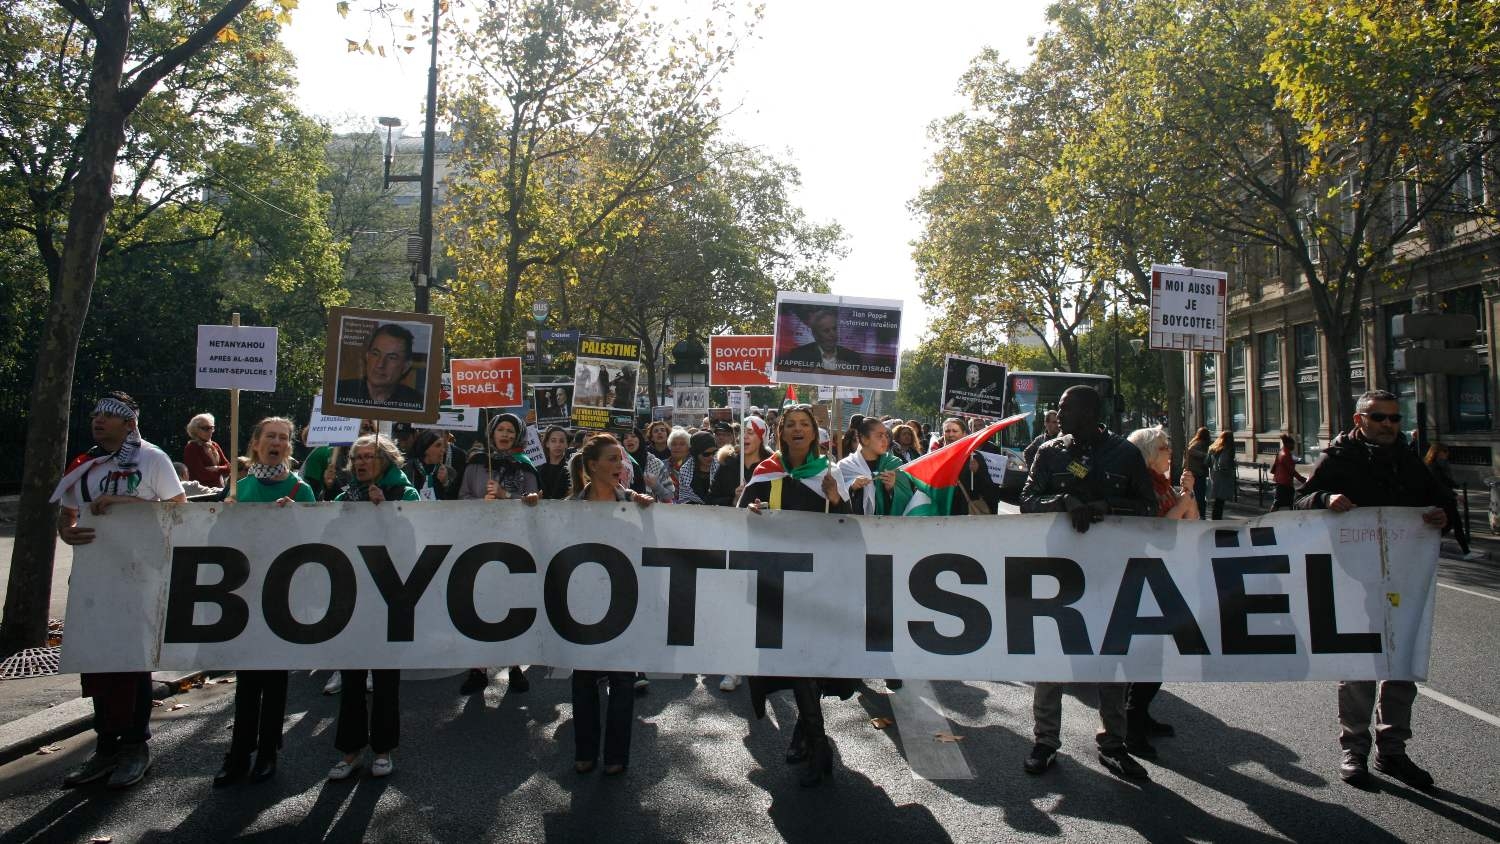 People take part in a pro-Palestinian demonstration on 10 October 2015 in Paris, calling for a boycott of Israel